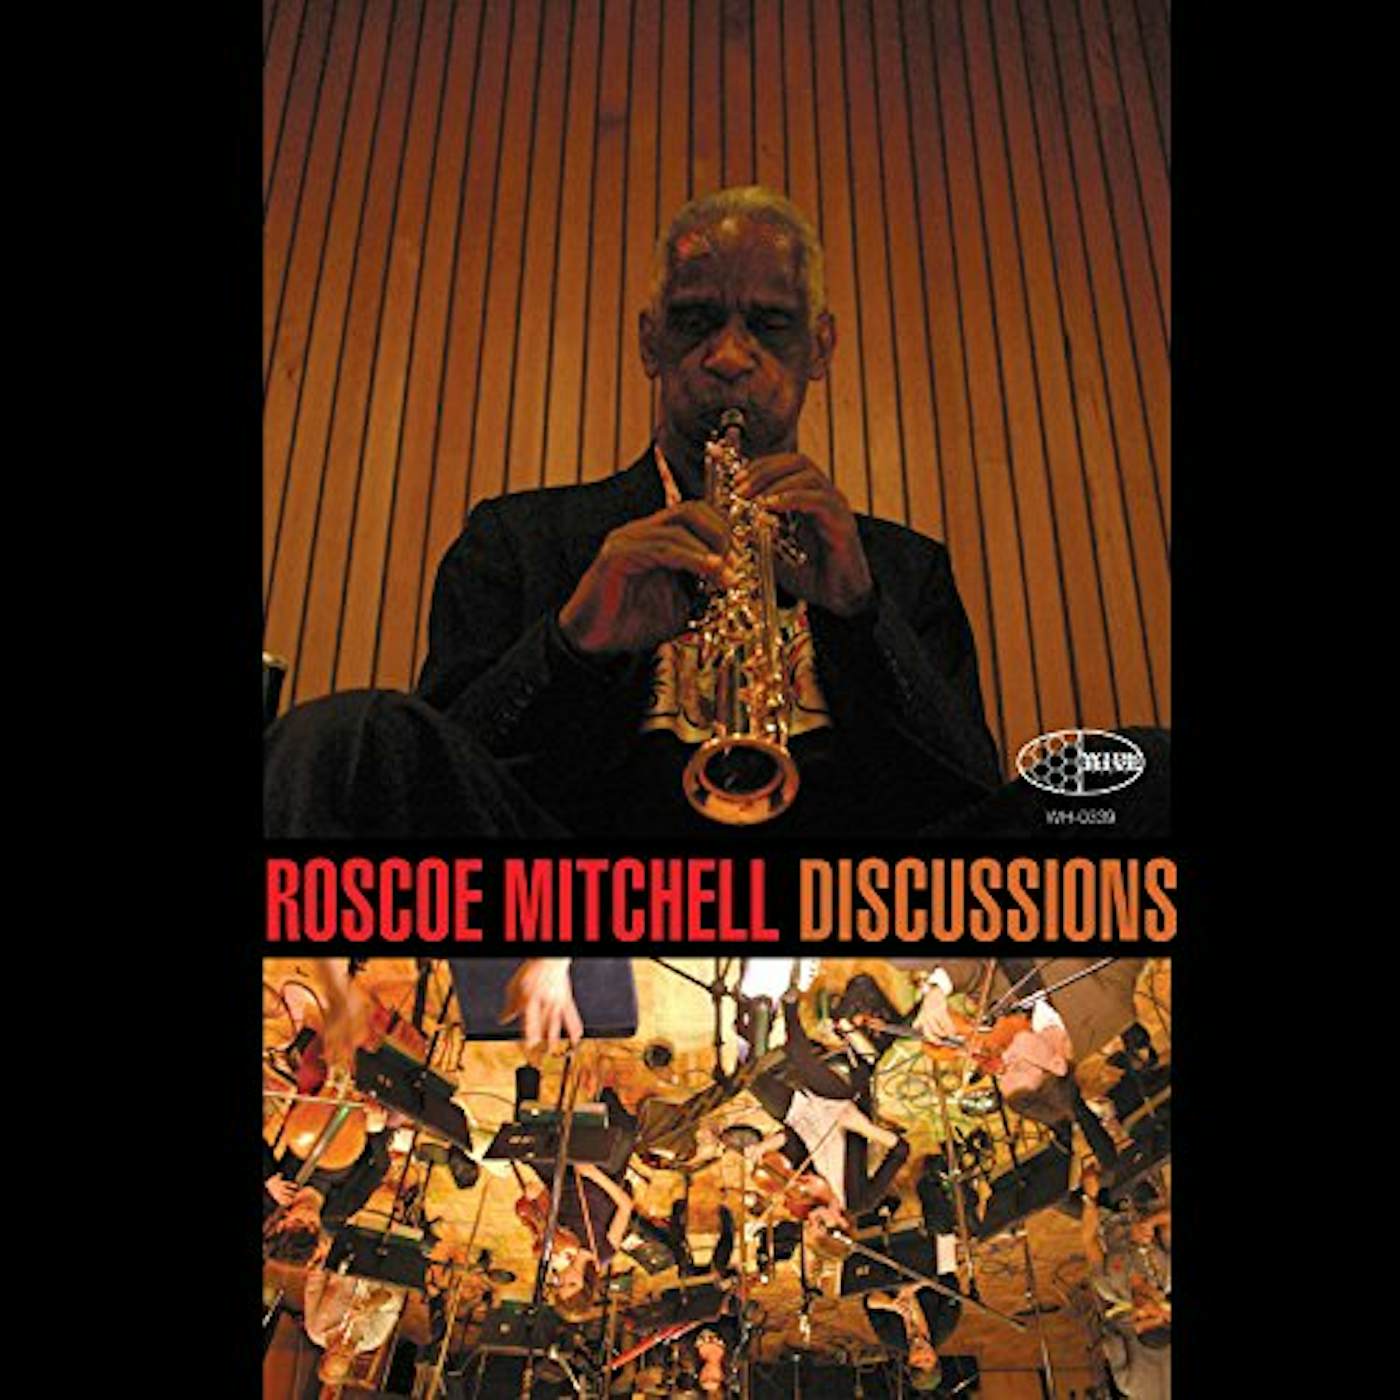 Roscoe Mitchell DISCUSSIONS ORCHESTRA CD